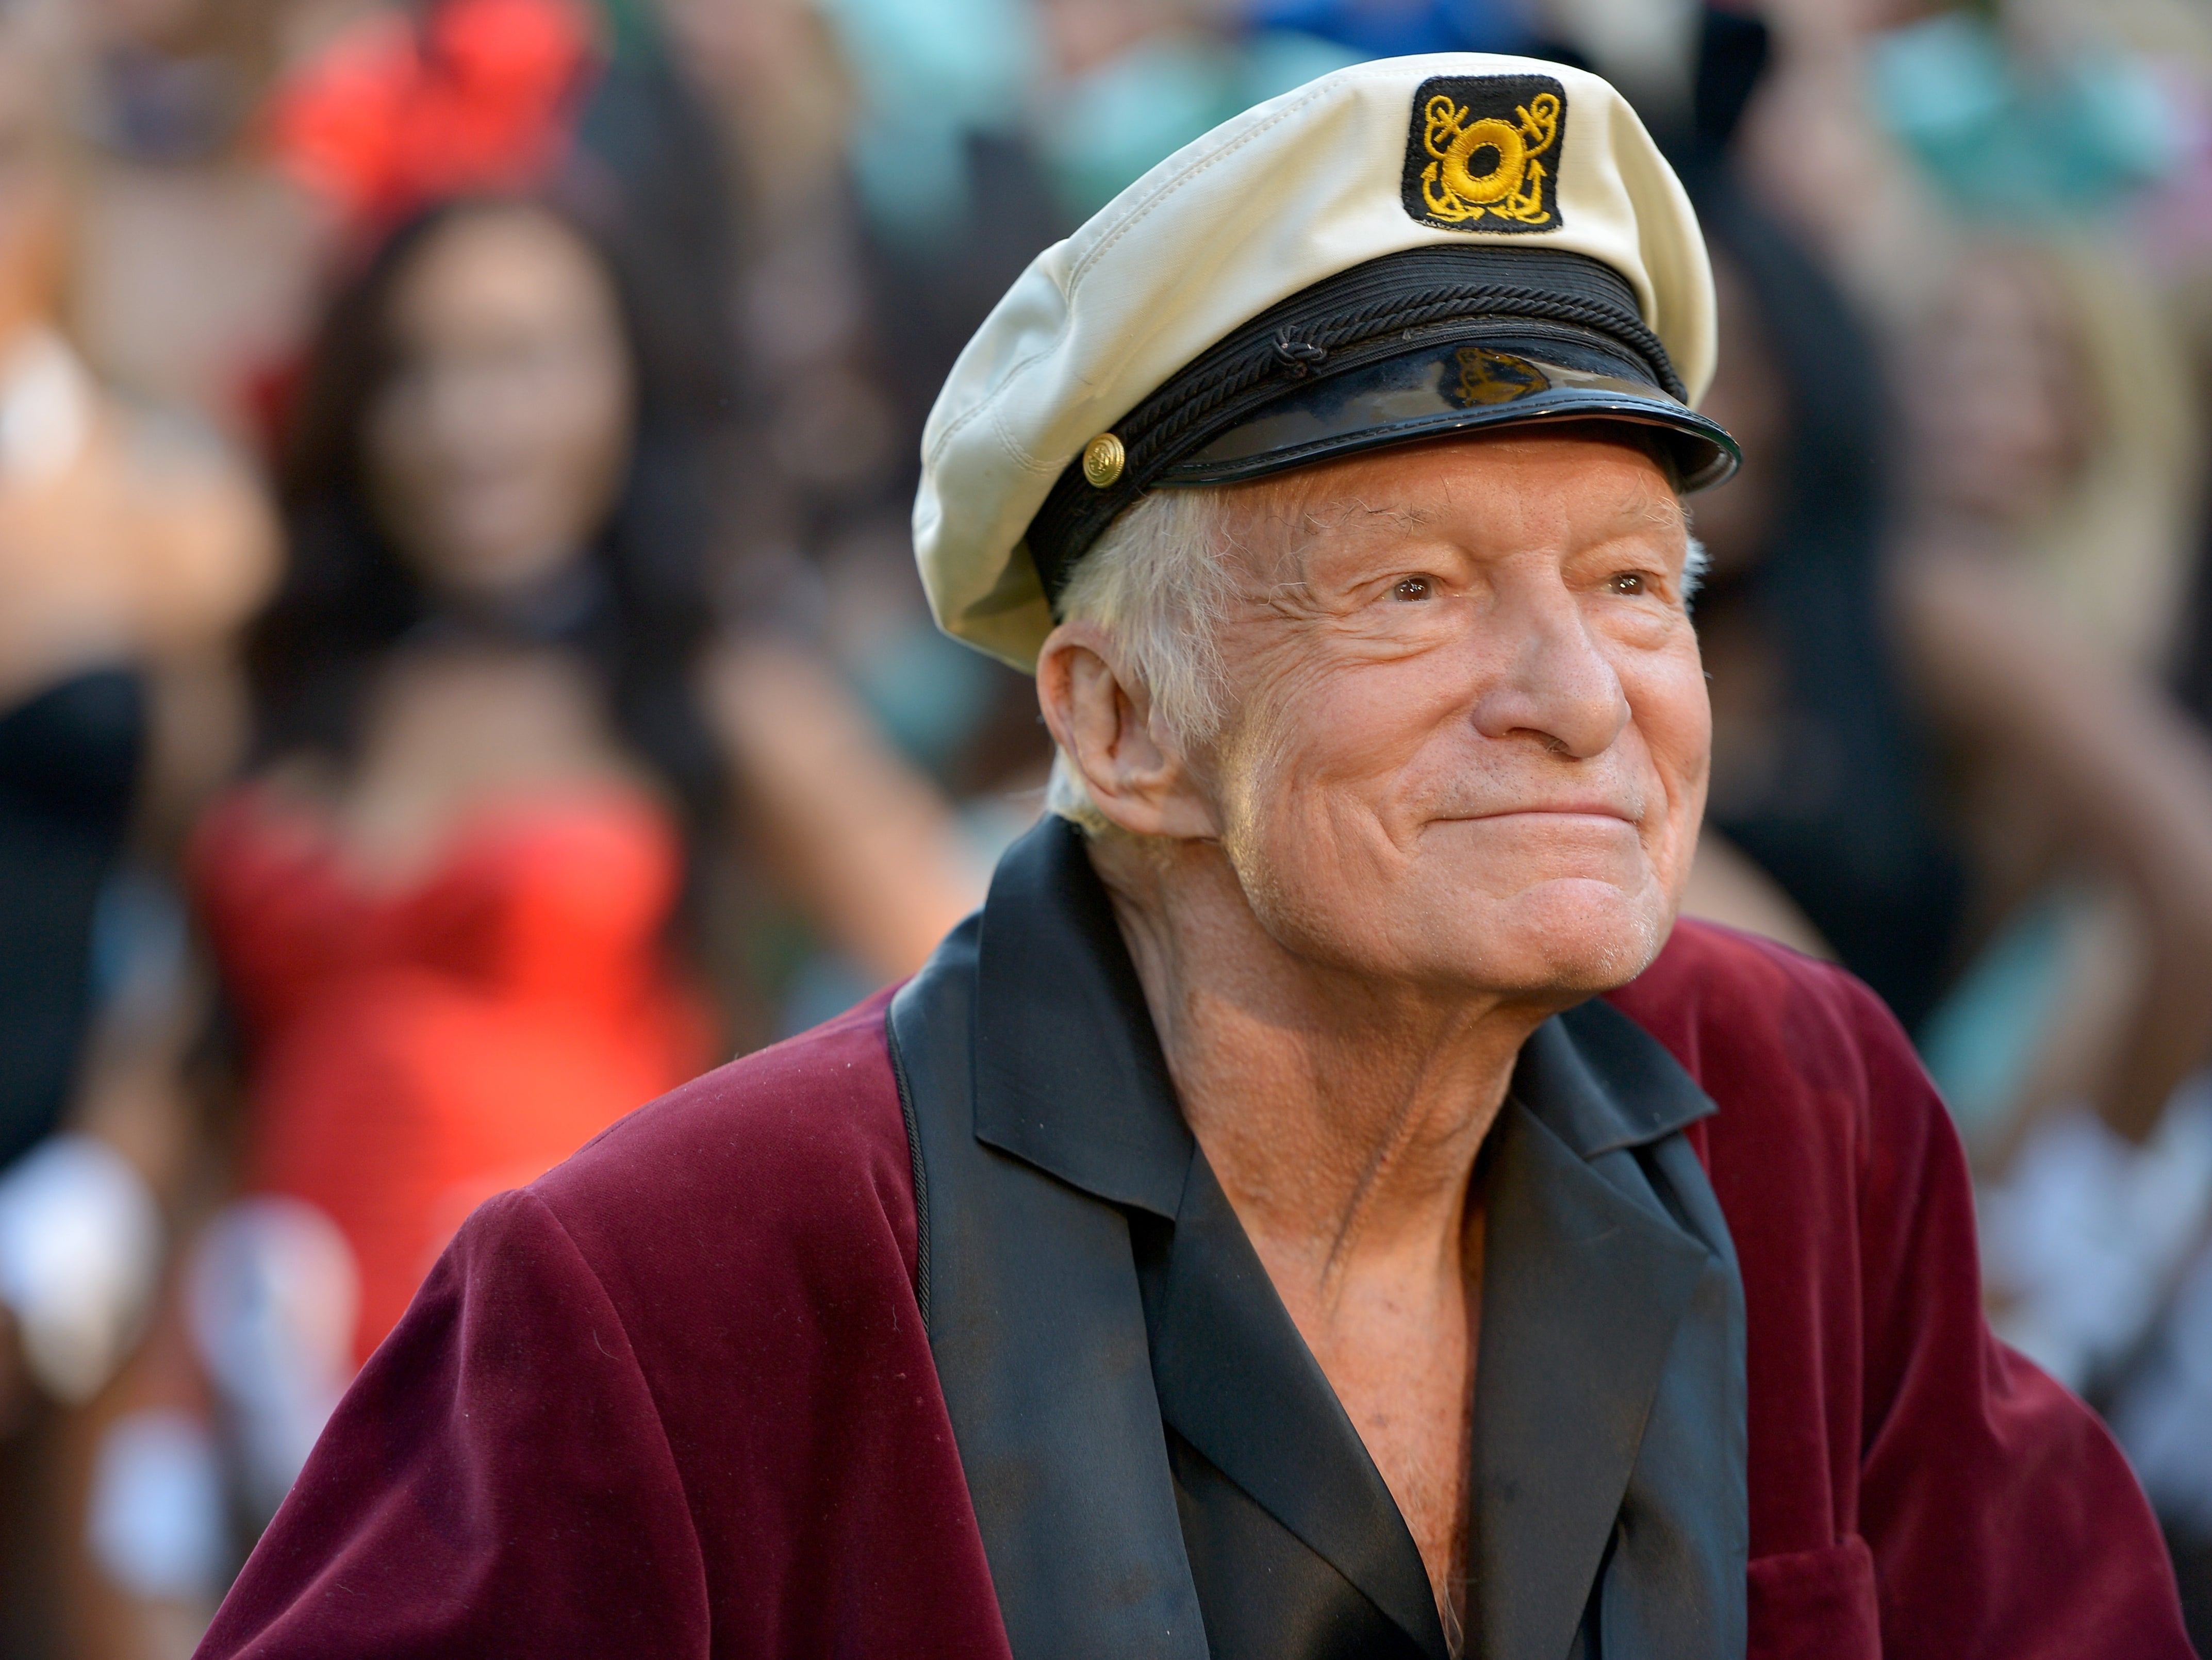 Hugh Hefner poses at Playboy’s 60th anniversary special event on 16 January 2014 in Los Angeles, California